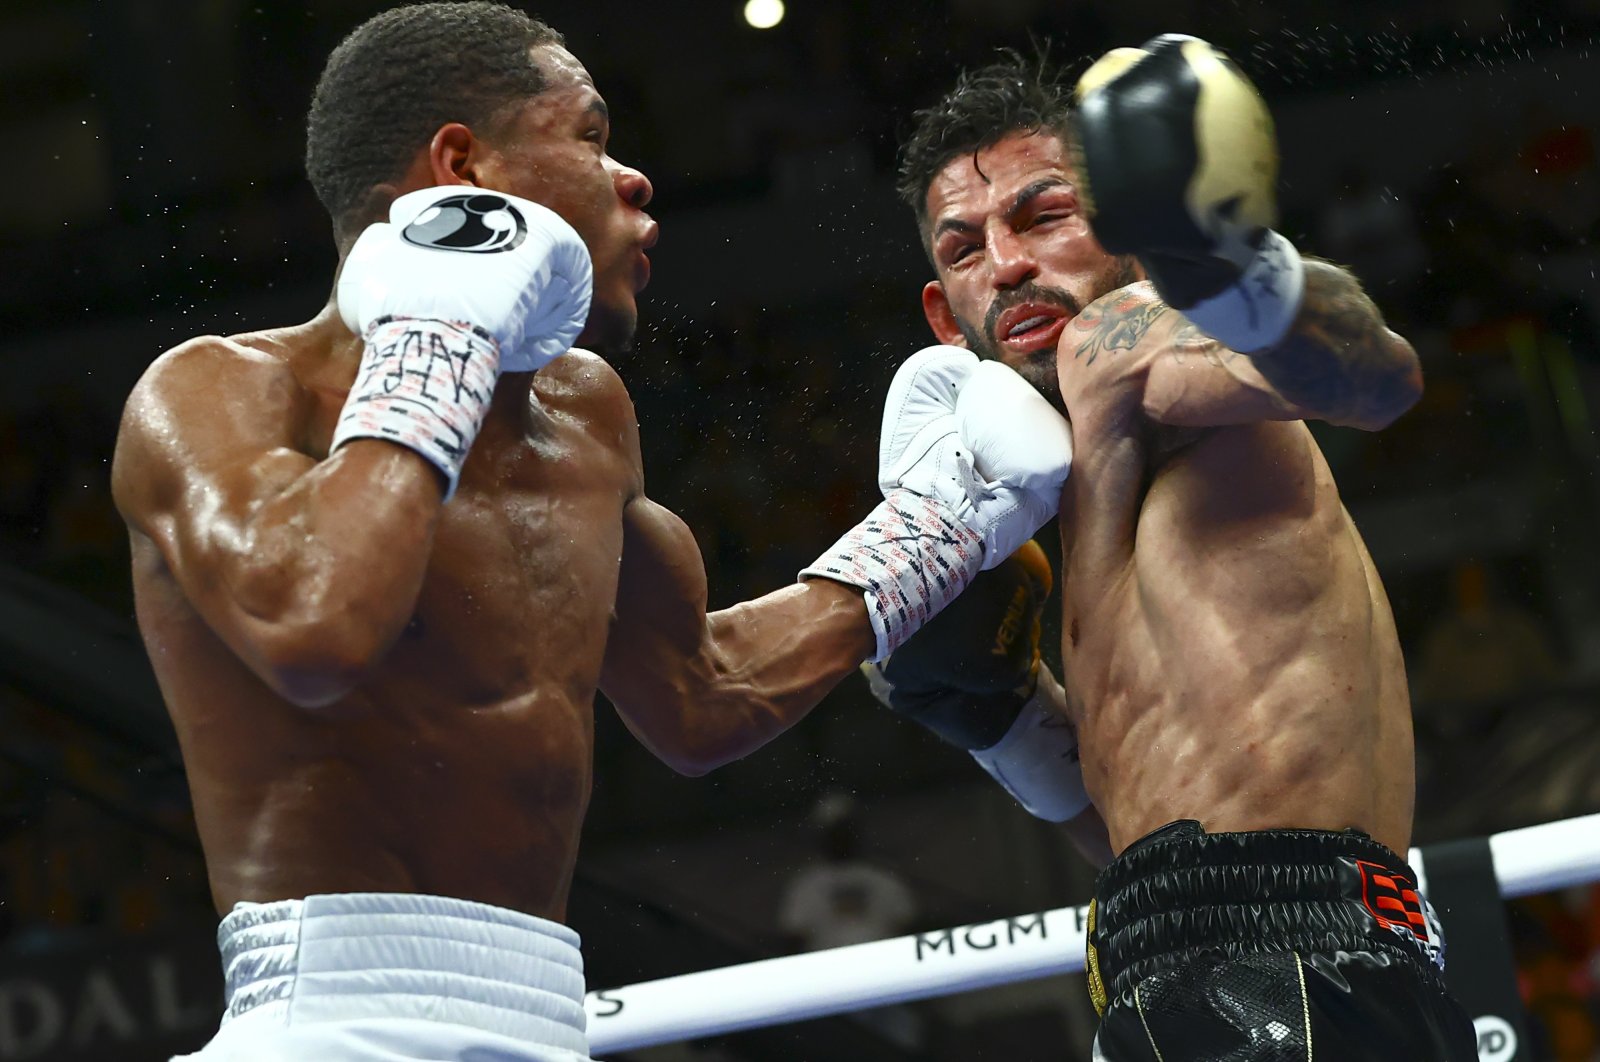 Devin Haney (L) punches Jorge Linares during the WBC lightweight title boxing match Saturday, May 29, 2021, in Las Vegas, U.S. (AP Photo)